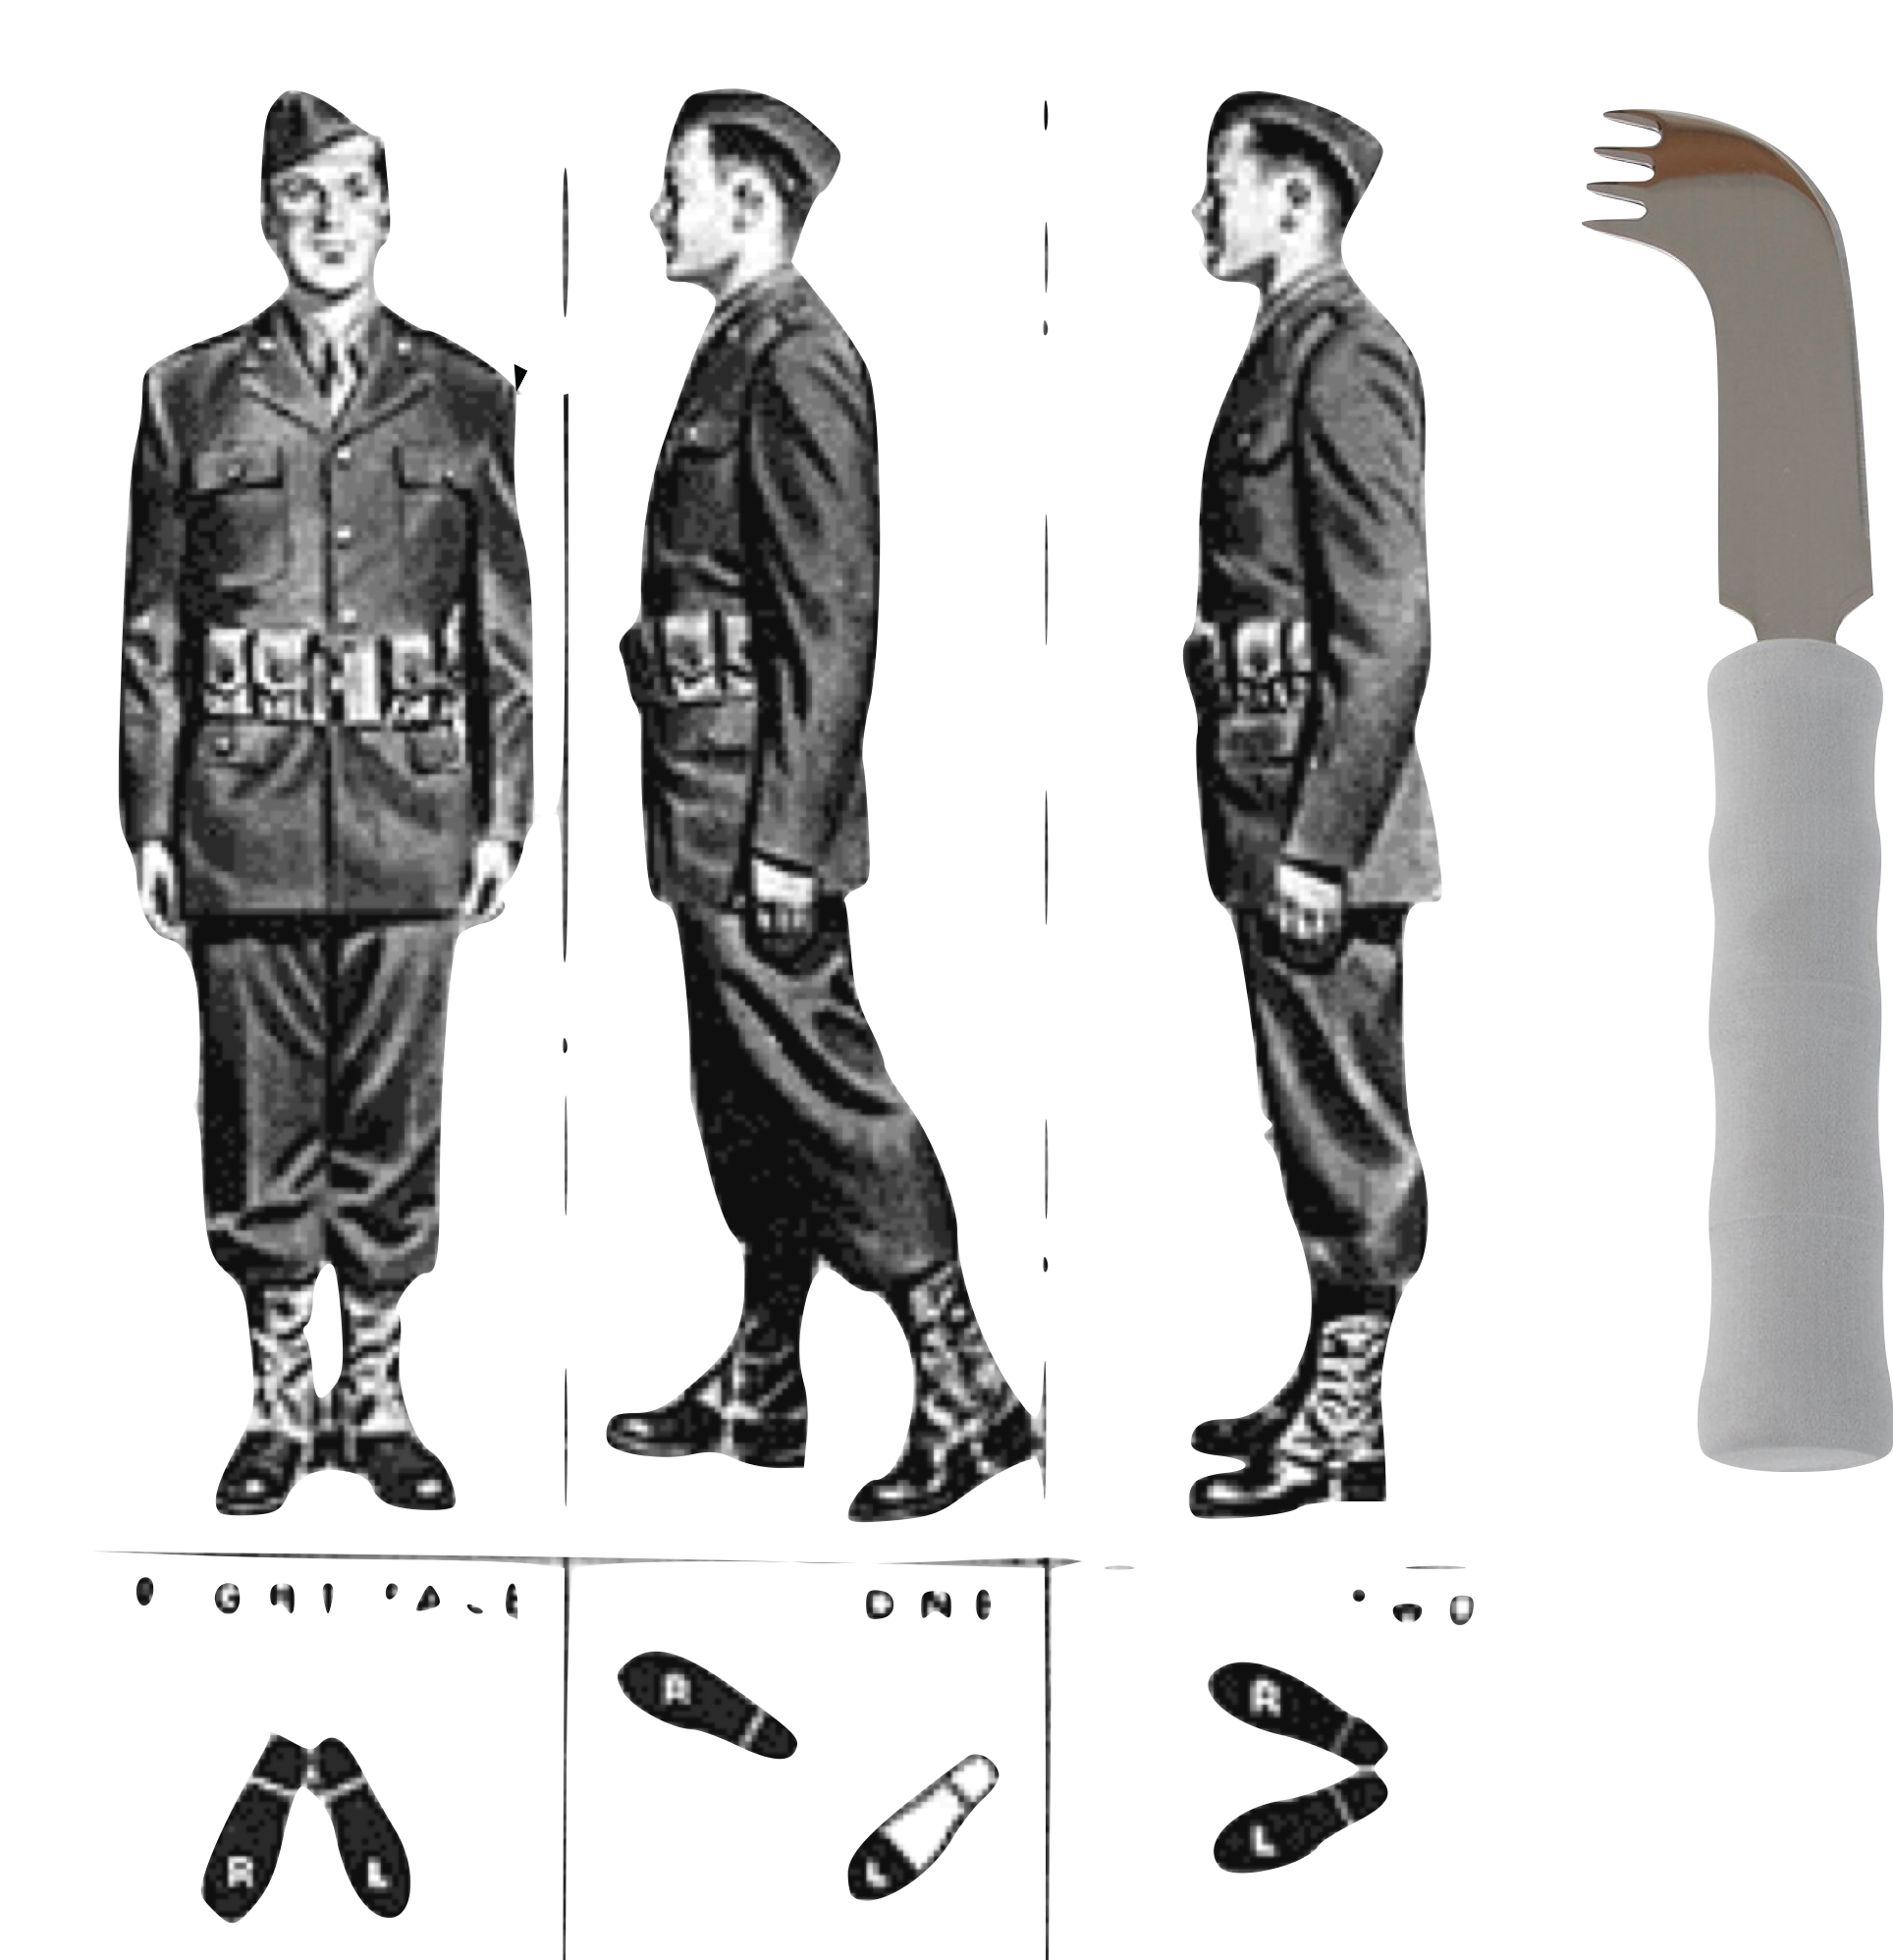 A cut out of three soldiers, followed by a hybrid knife/spoon